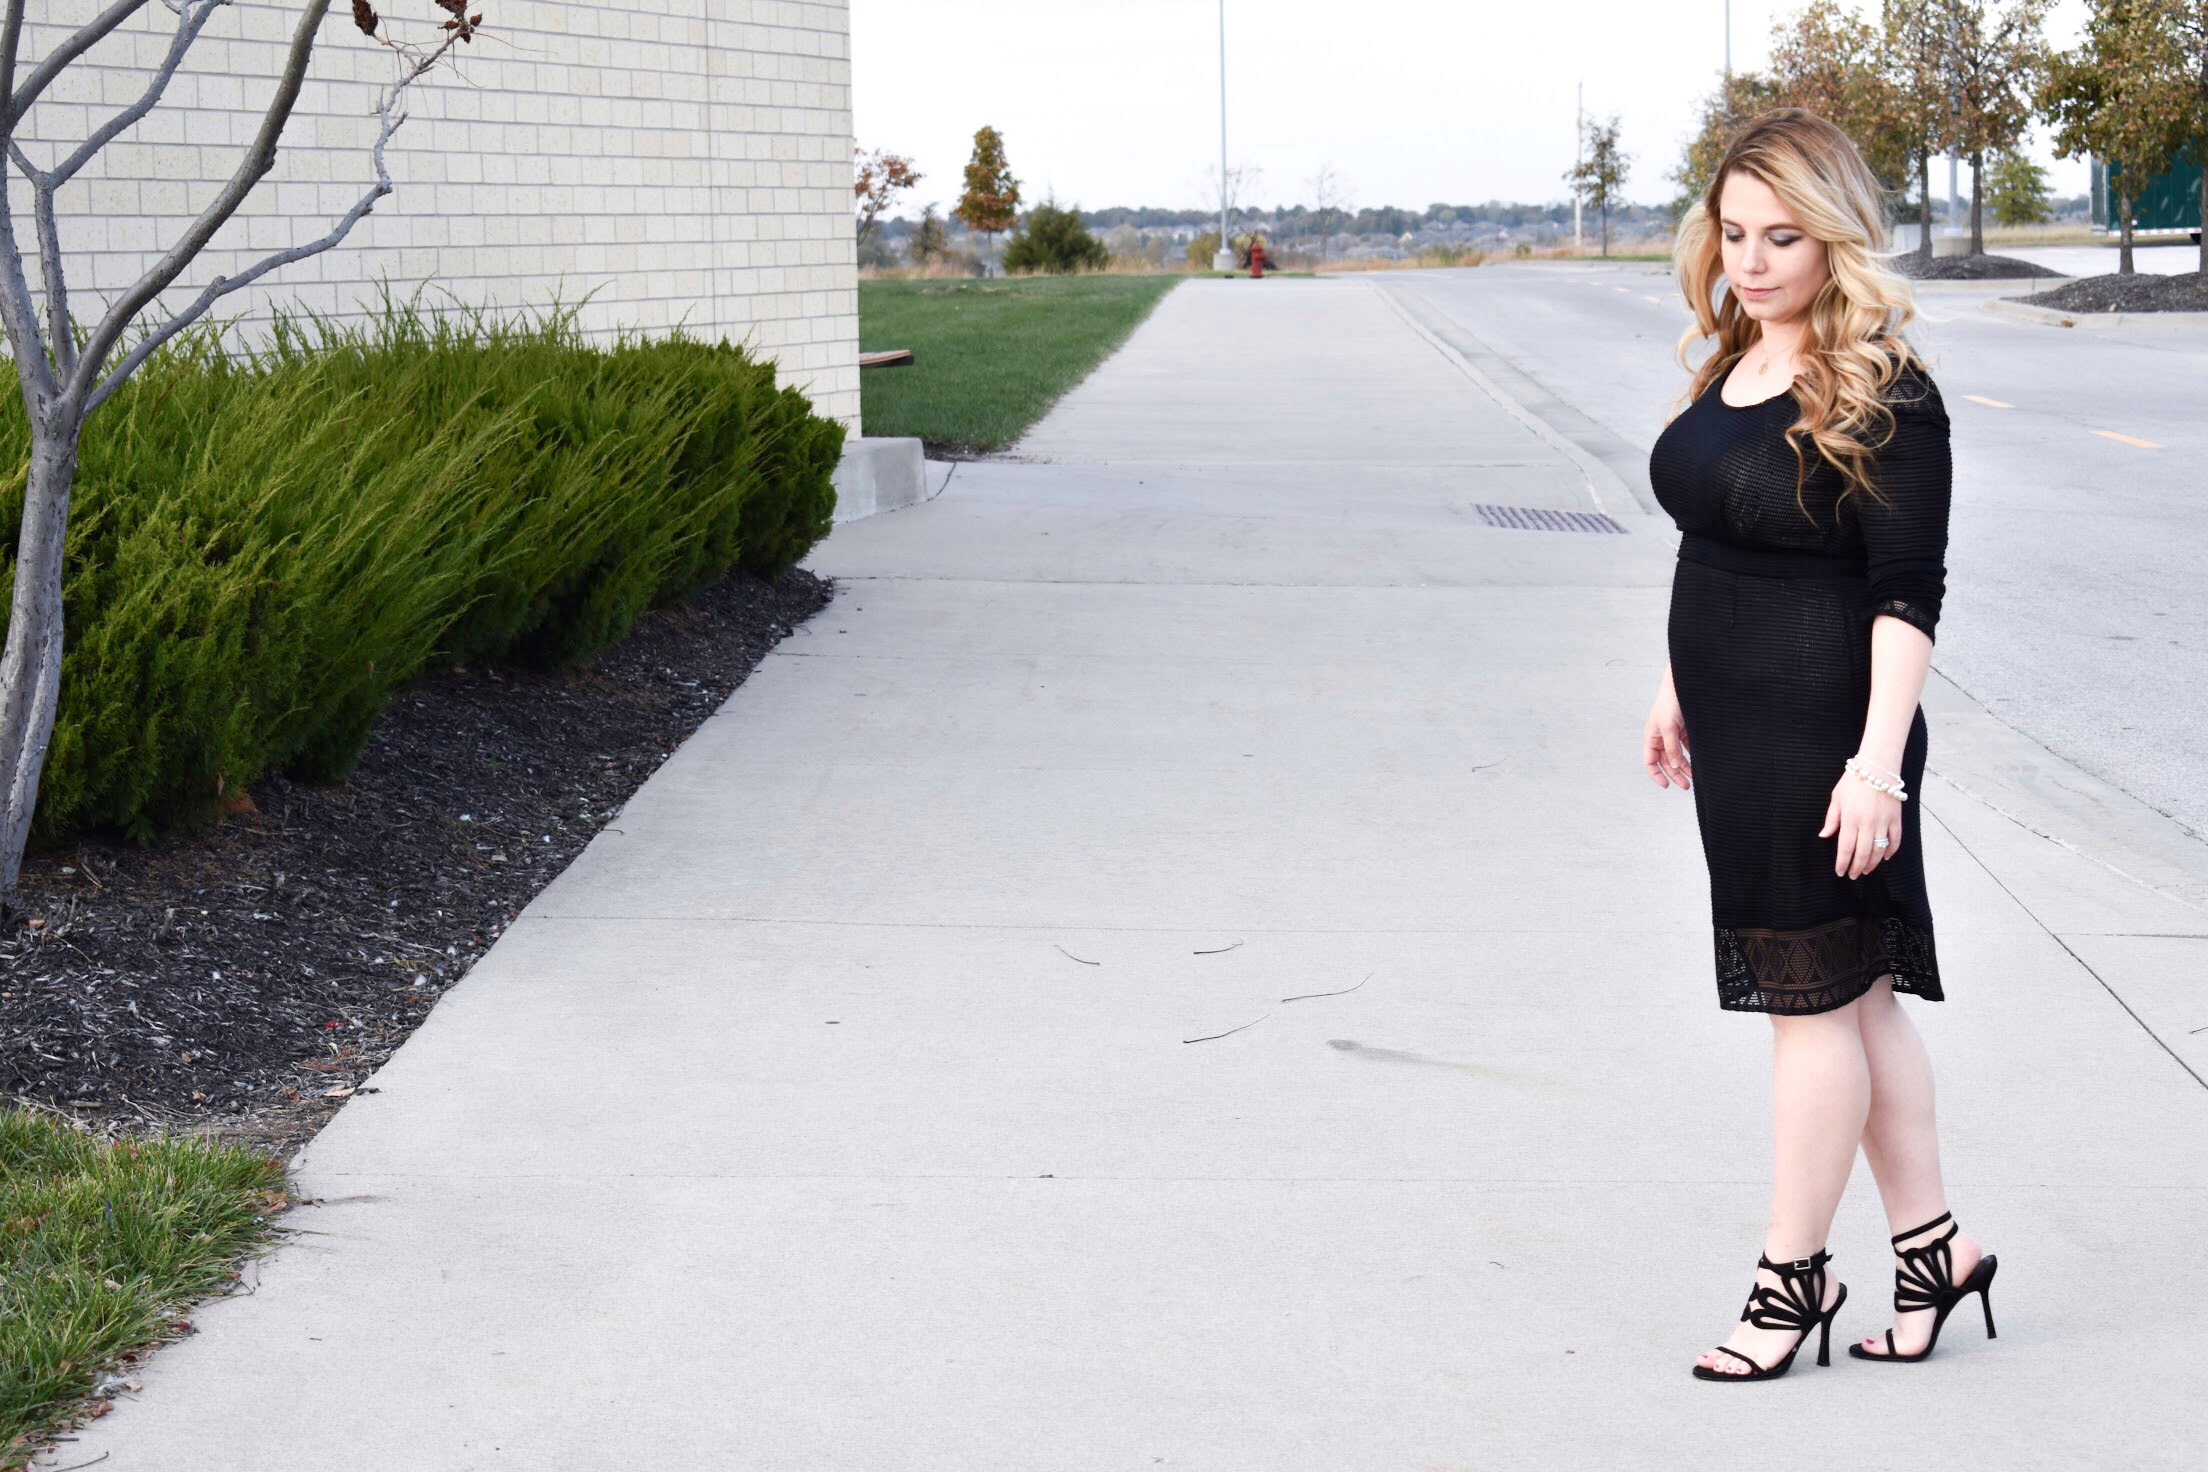 Looking for holiday clothes for breastfeeding moms? Finding a nursing-friendly holiday dress to wear for Christmas parties and other events can be a challenge. Here's the perfect little black dress for breastfeeding moms to wear during the holidays and beyond! Featuring a review of Vida Leche Amor breastfeeding clothes. [ad]